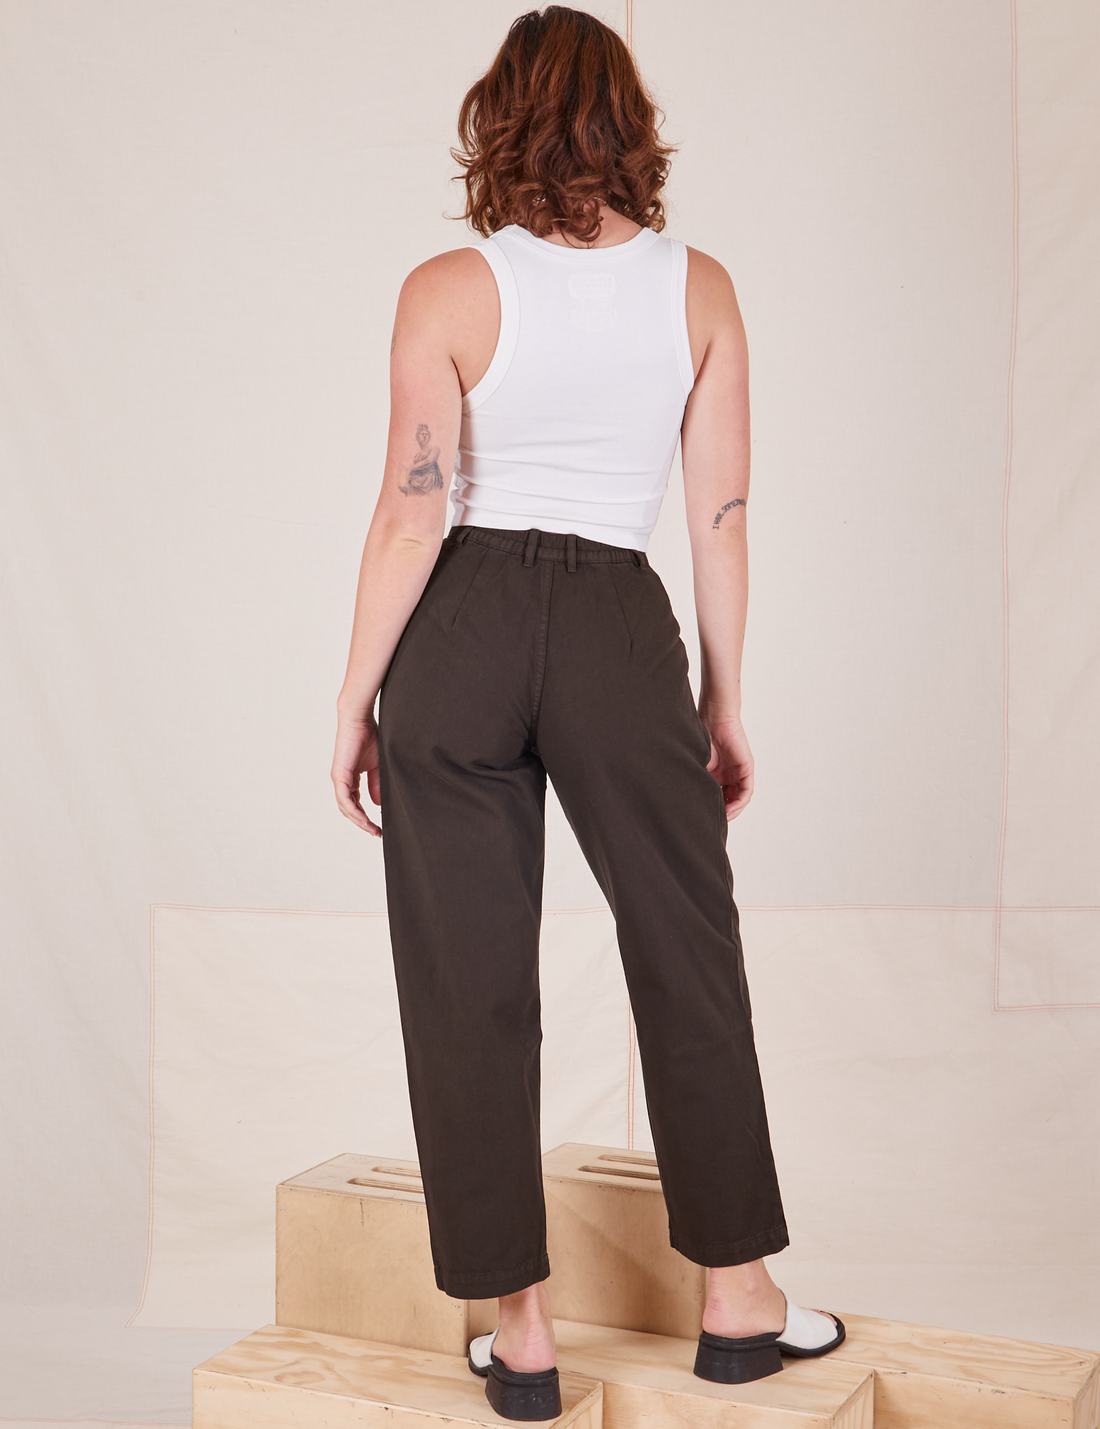 Back view of Heavyweight Trousers in Espresso Brown and vintage off-white Cropped Tank Top worn by Alex